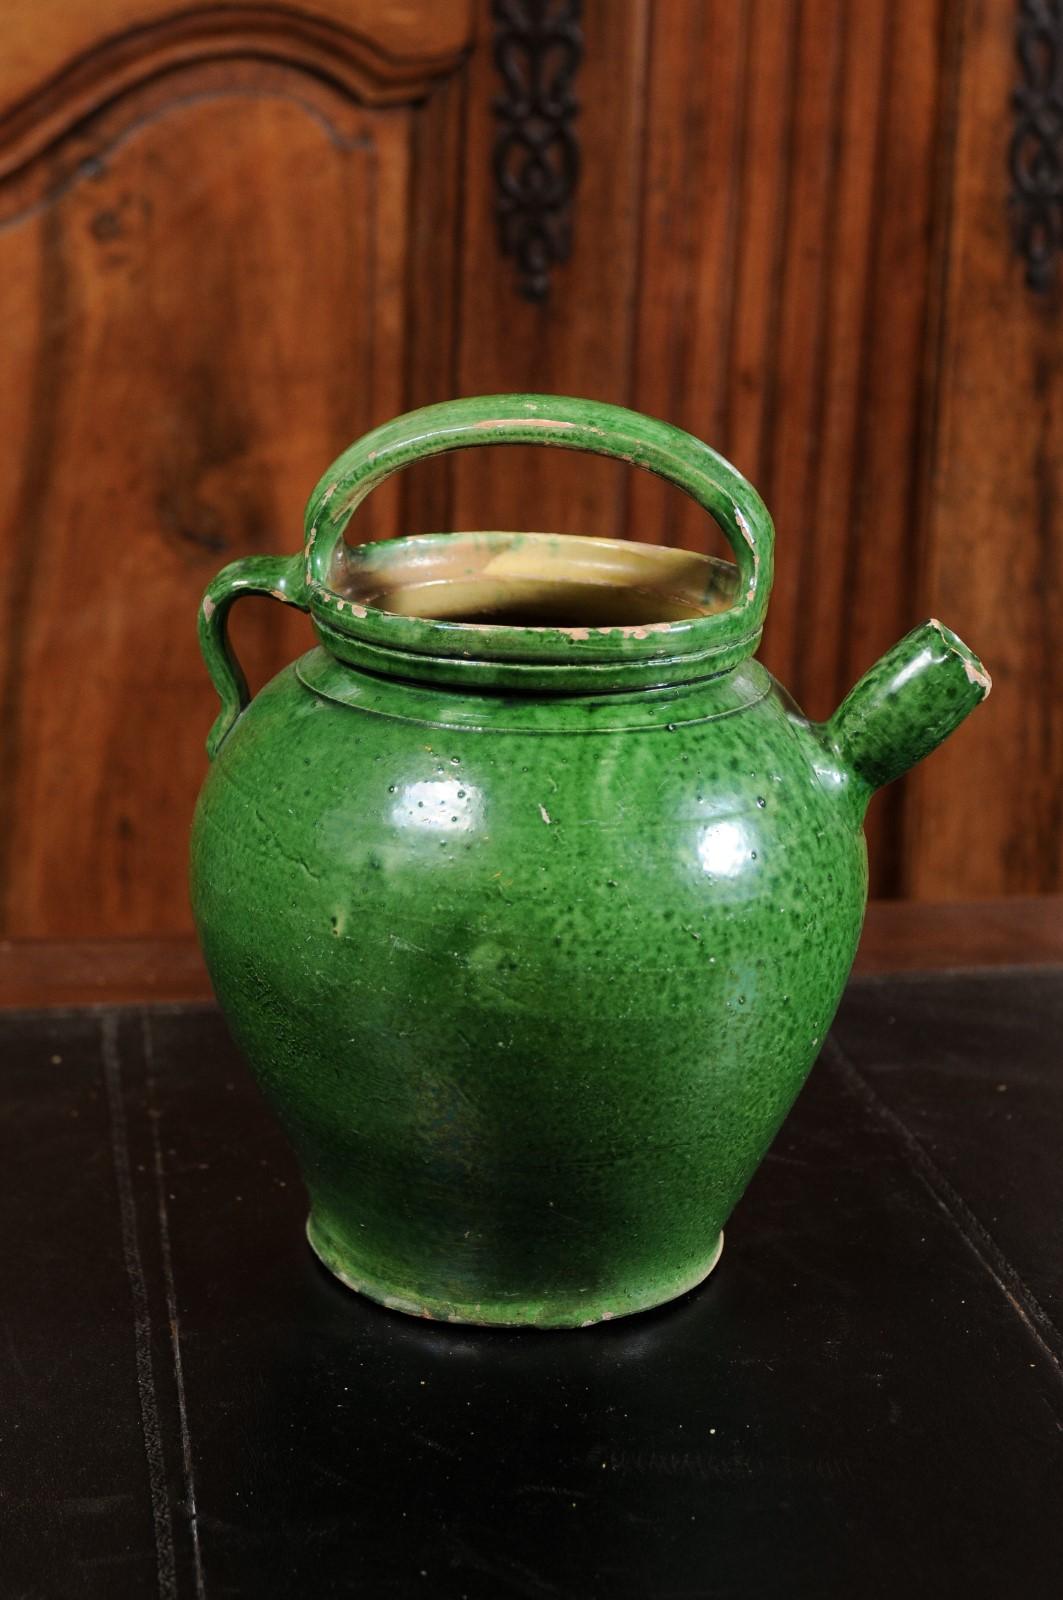 A French Provincial pottery olive oil jug from the 19th century, with green glaze, two handles and distressed patina. Created in Southern France during the 19th century, this olive oil jug features a green glazed finish perfectly complimenting its